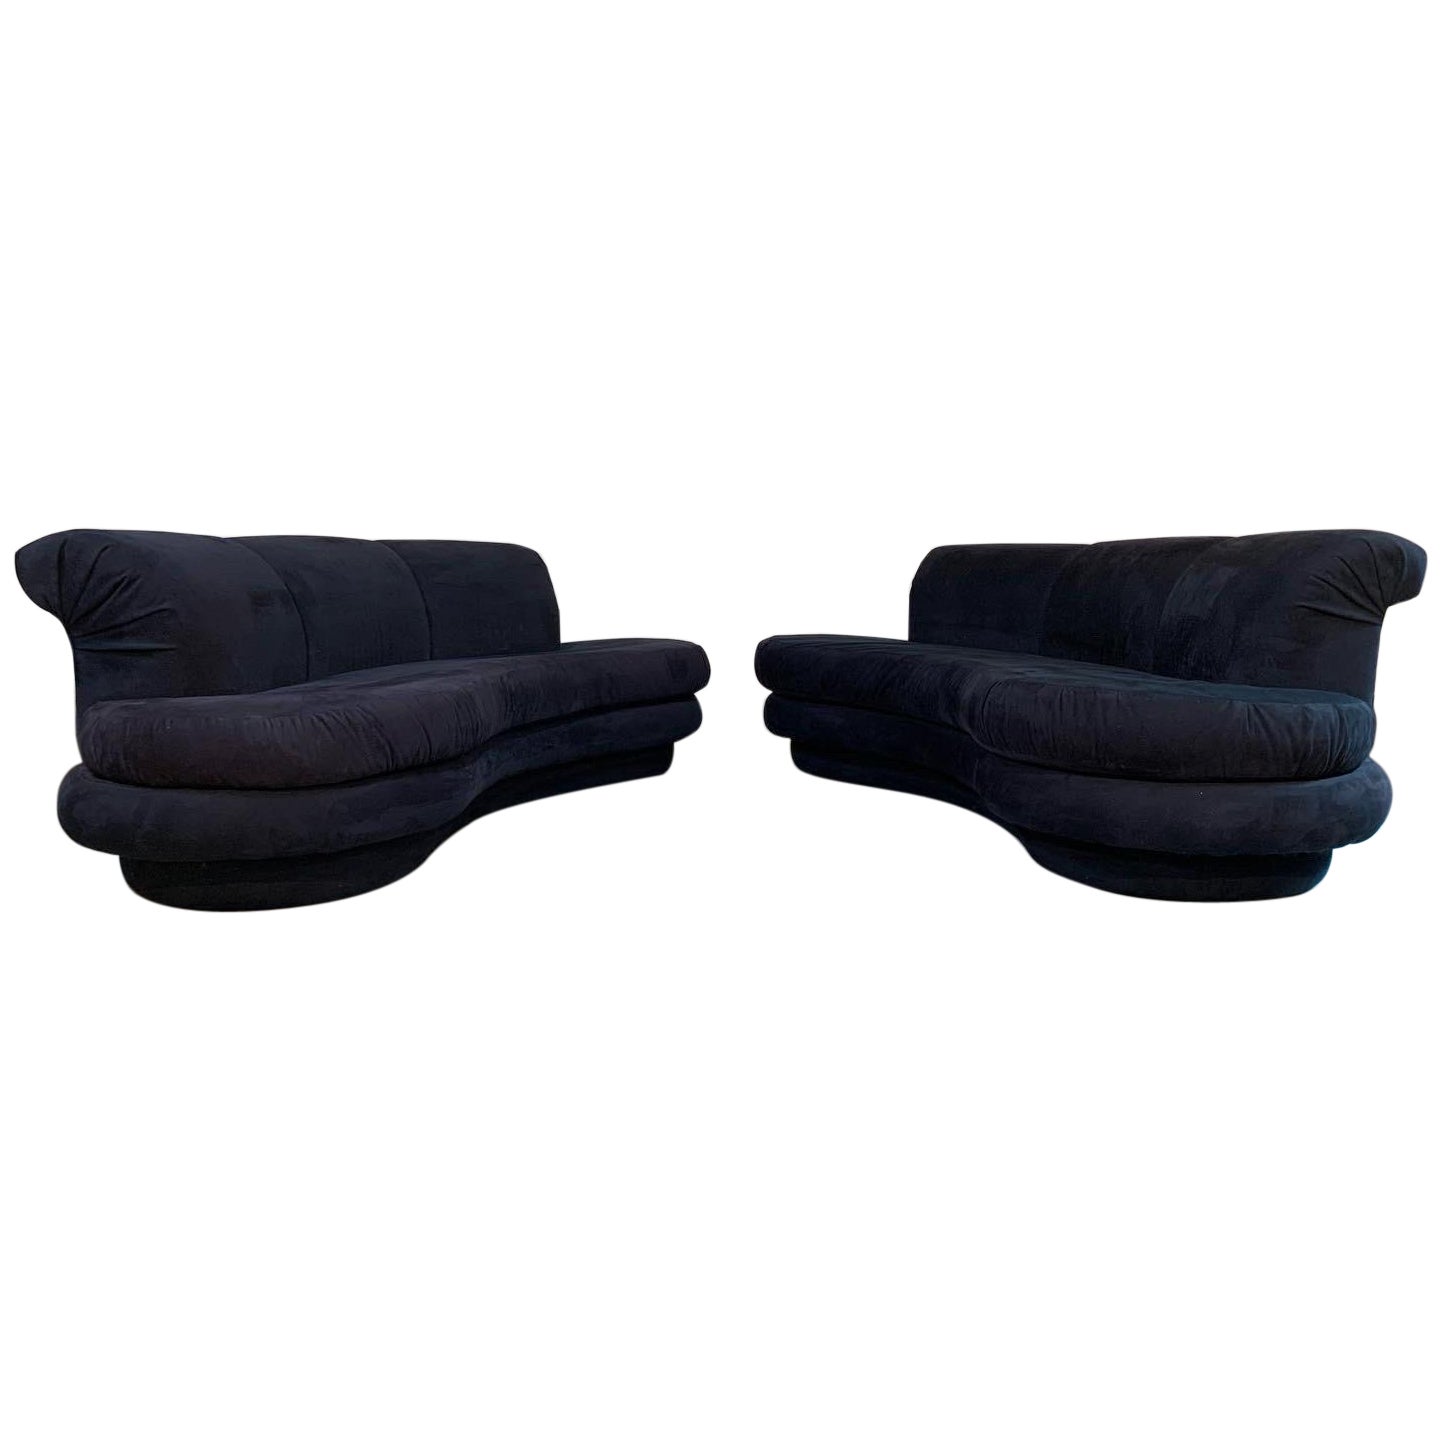 Matched Pair of Curved Kidney Sofas Attributed to Kagan For Directional 